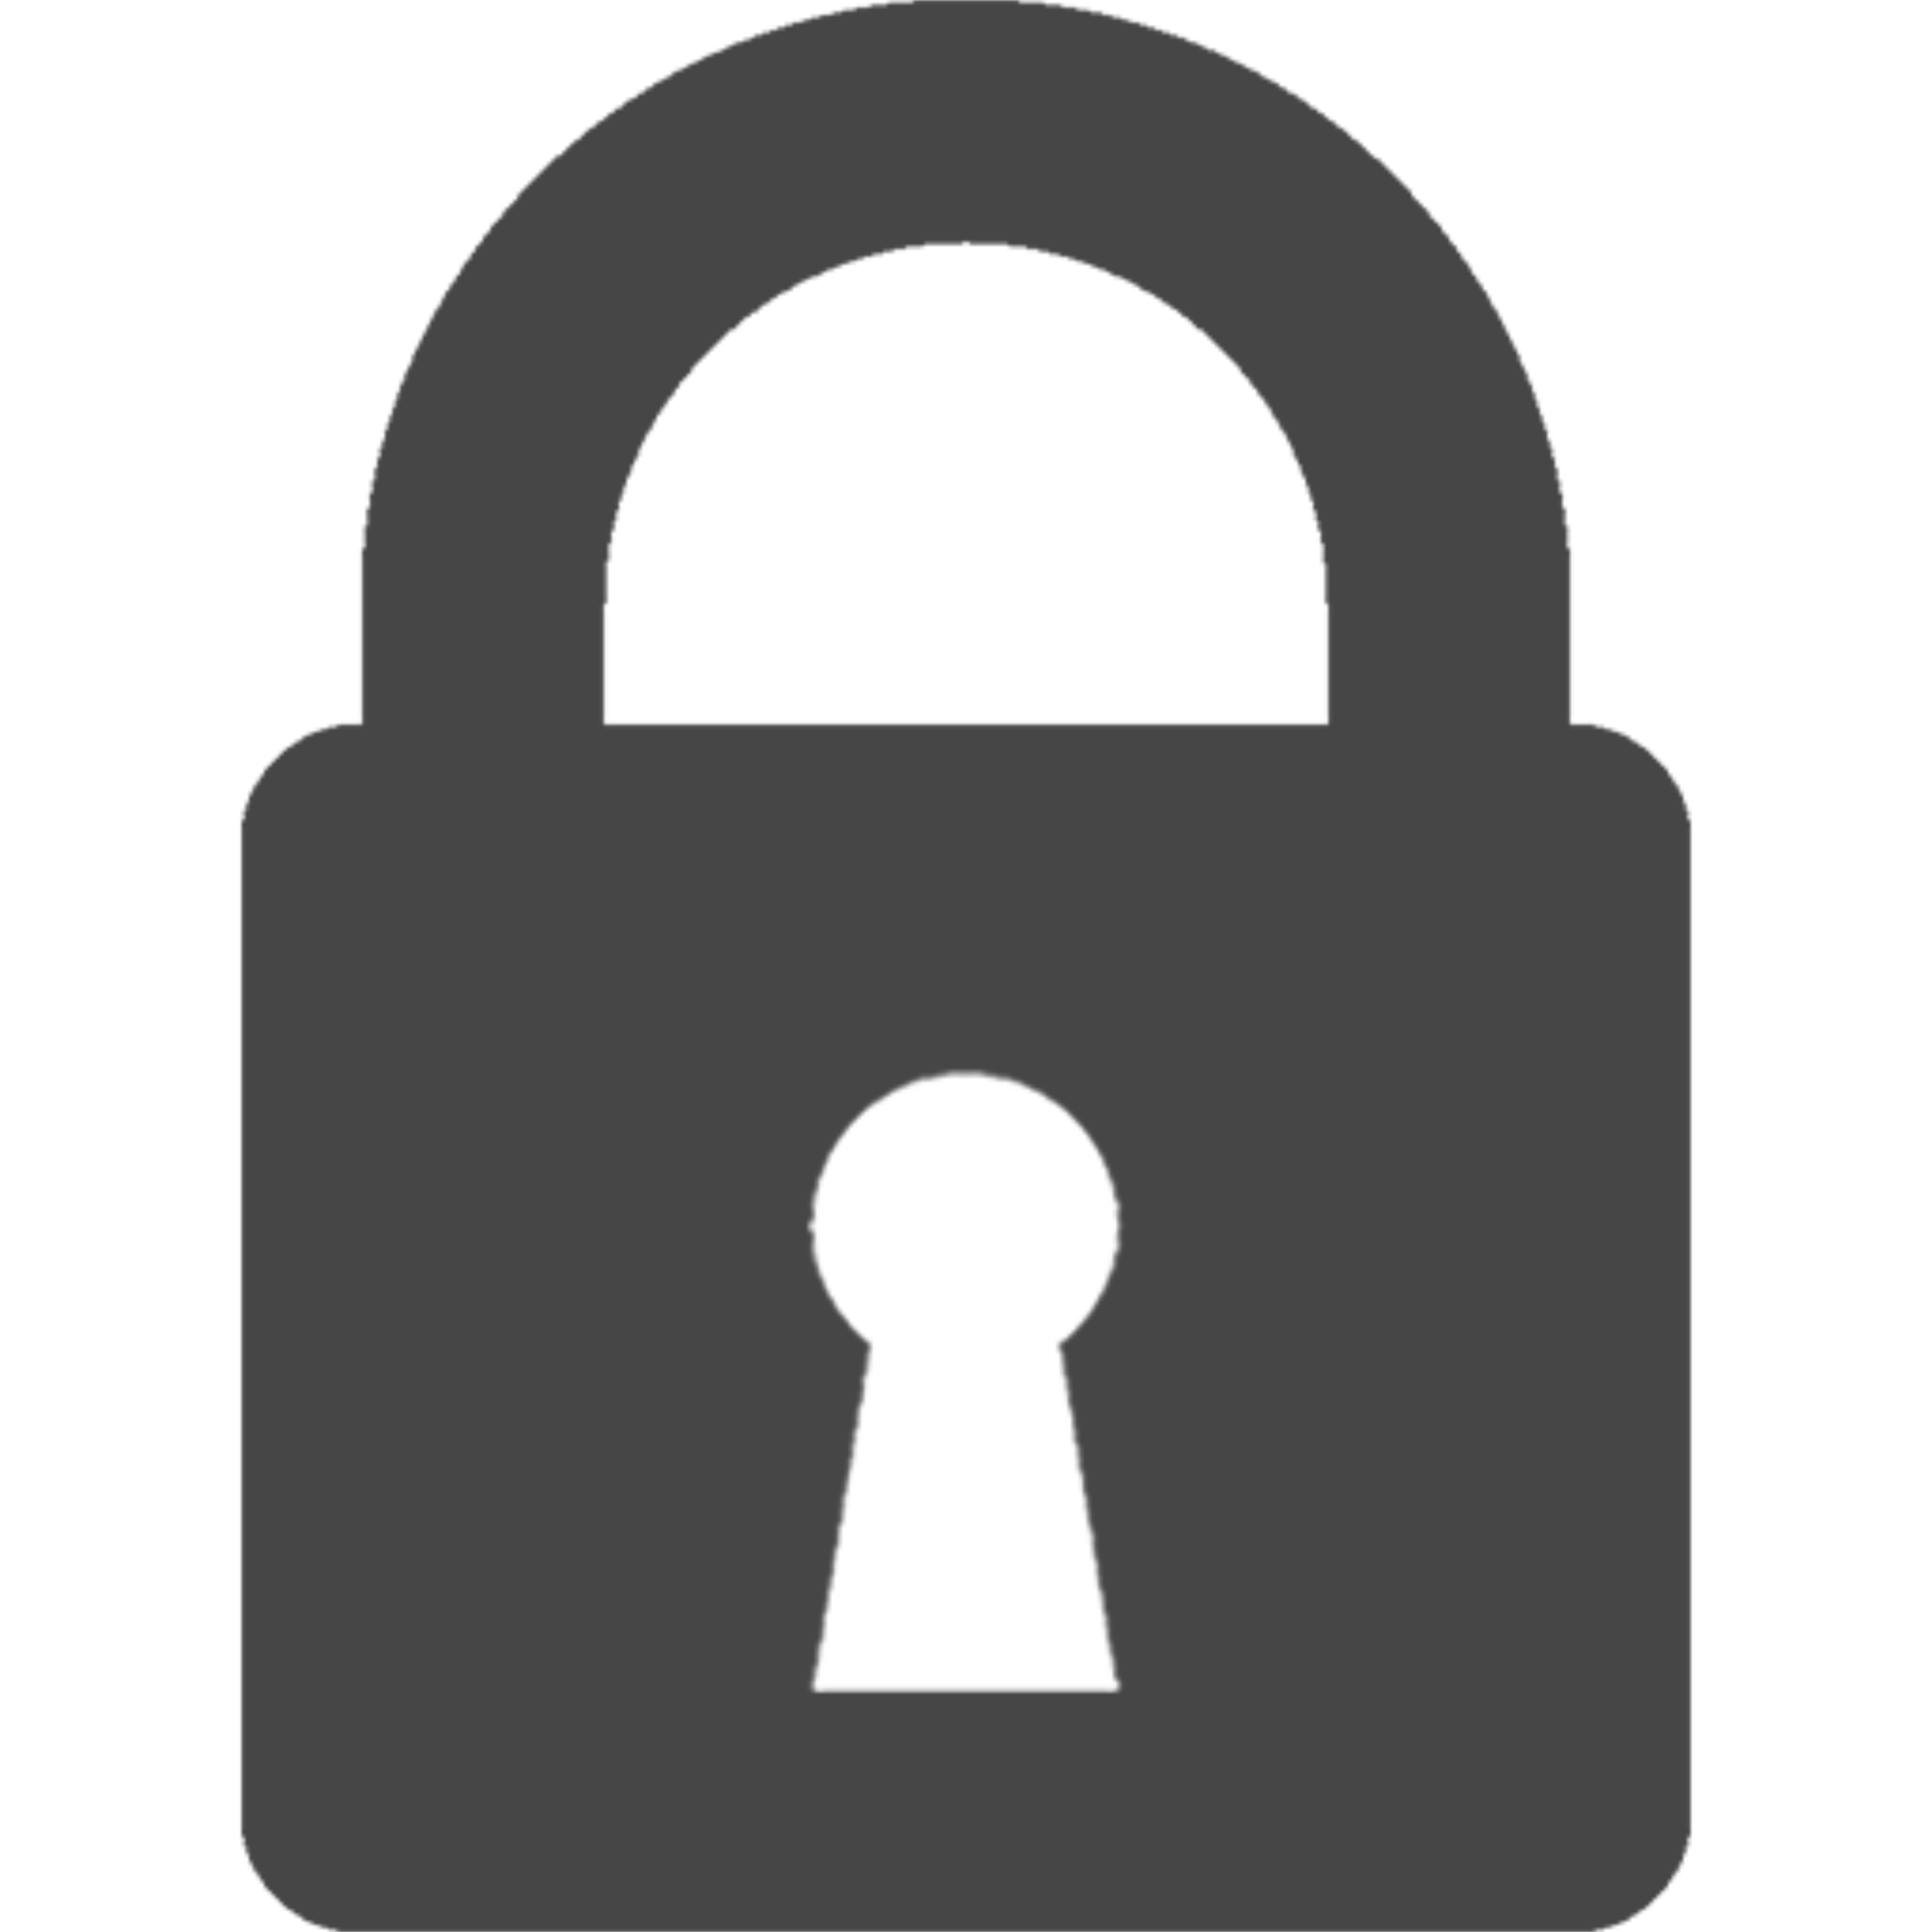 Settings icon with a lock symbol